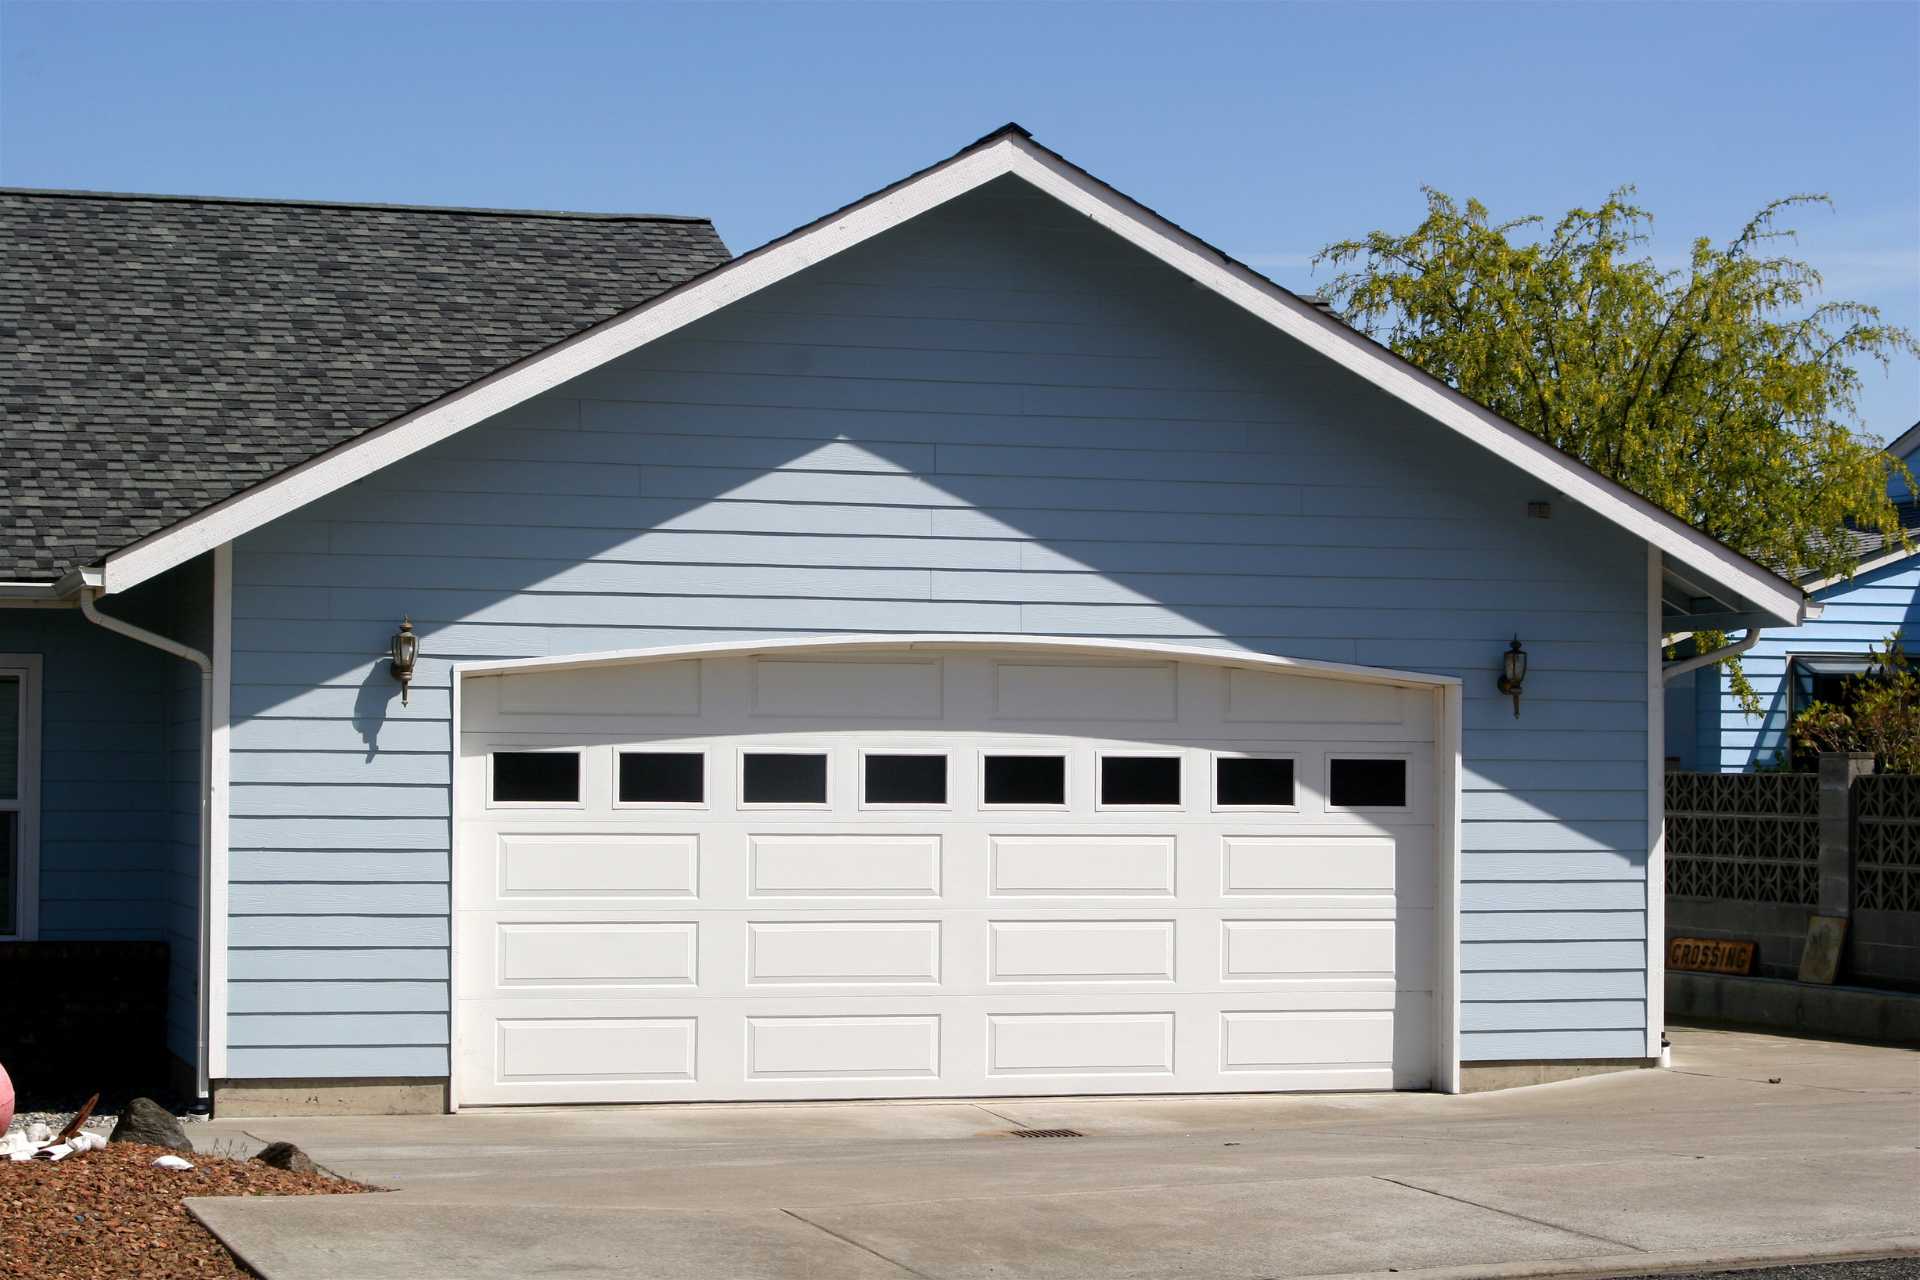 What are the Different Styles of Garage Doors?